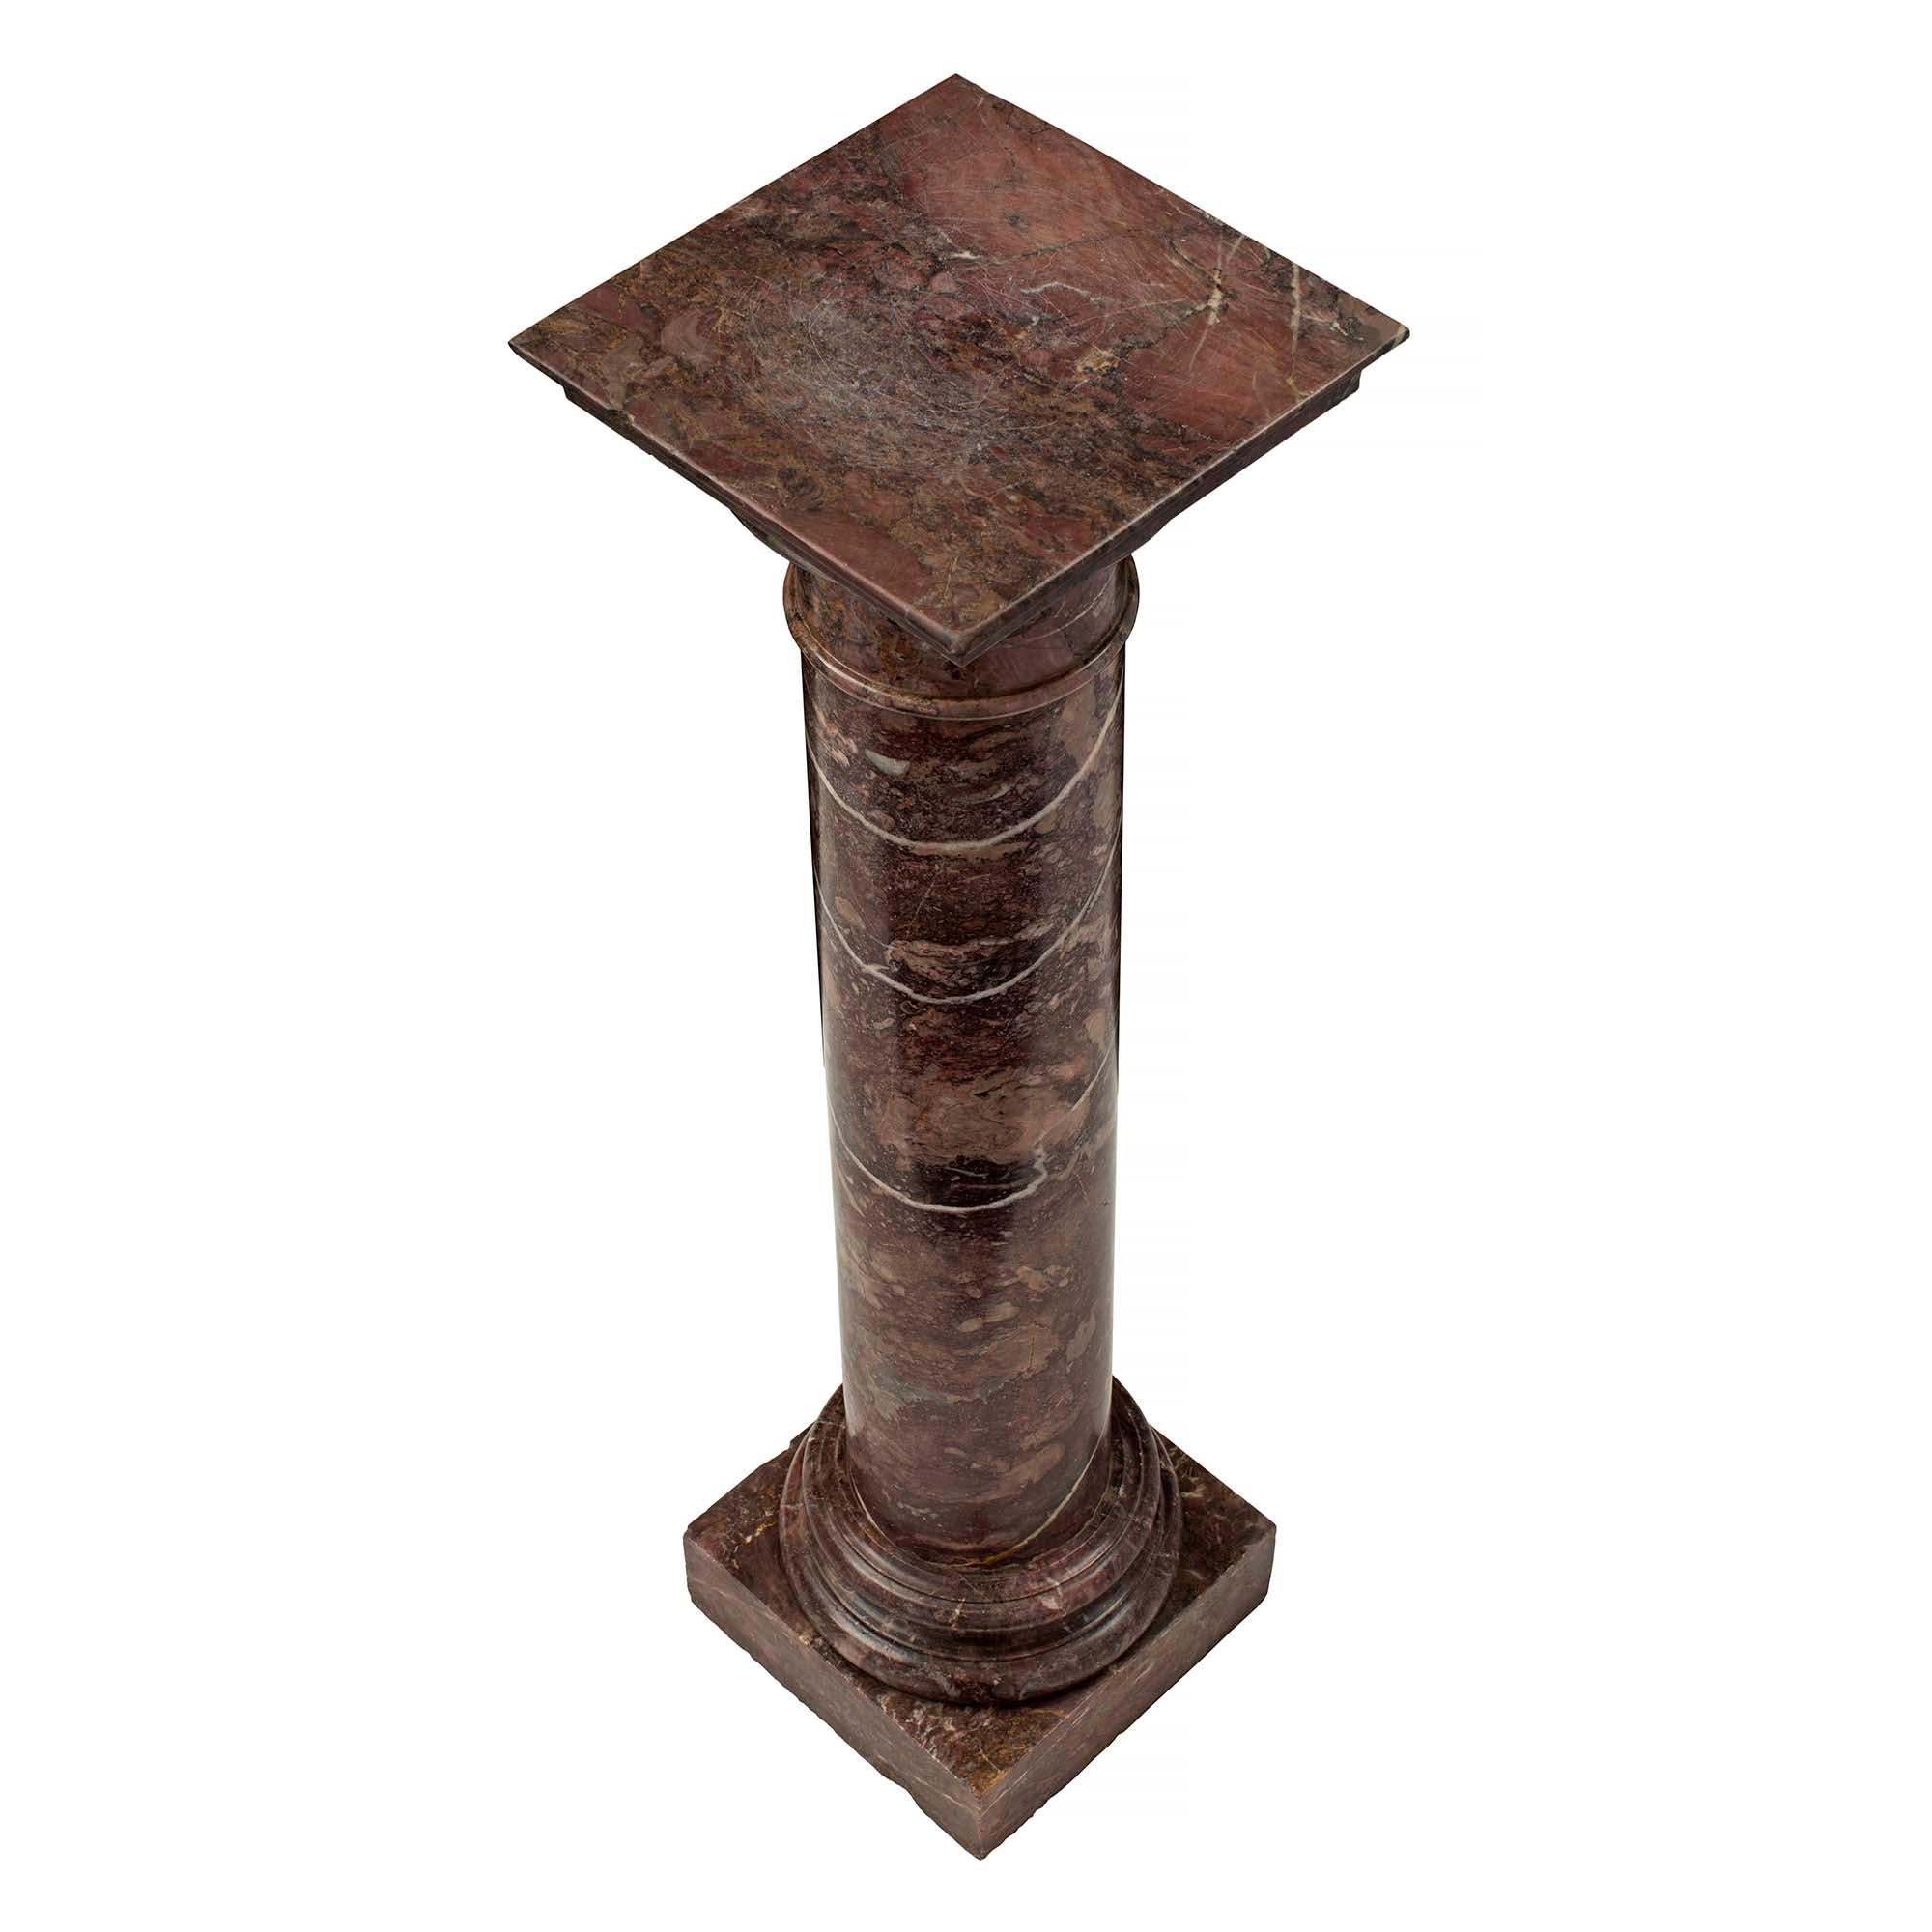 A beautiful Italian 19th century marble pedestal. The pedestal is raised by a square base with a circular mottled design and round column. Above the mottled design is the square display surface.

